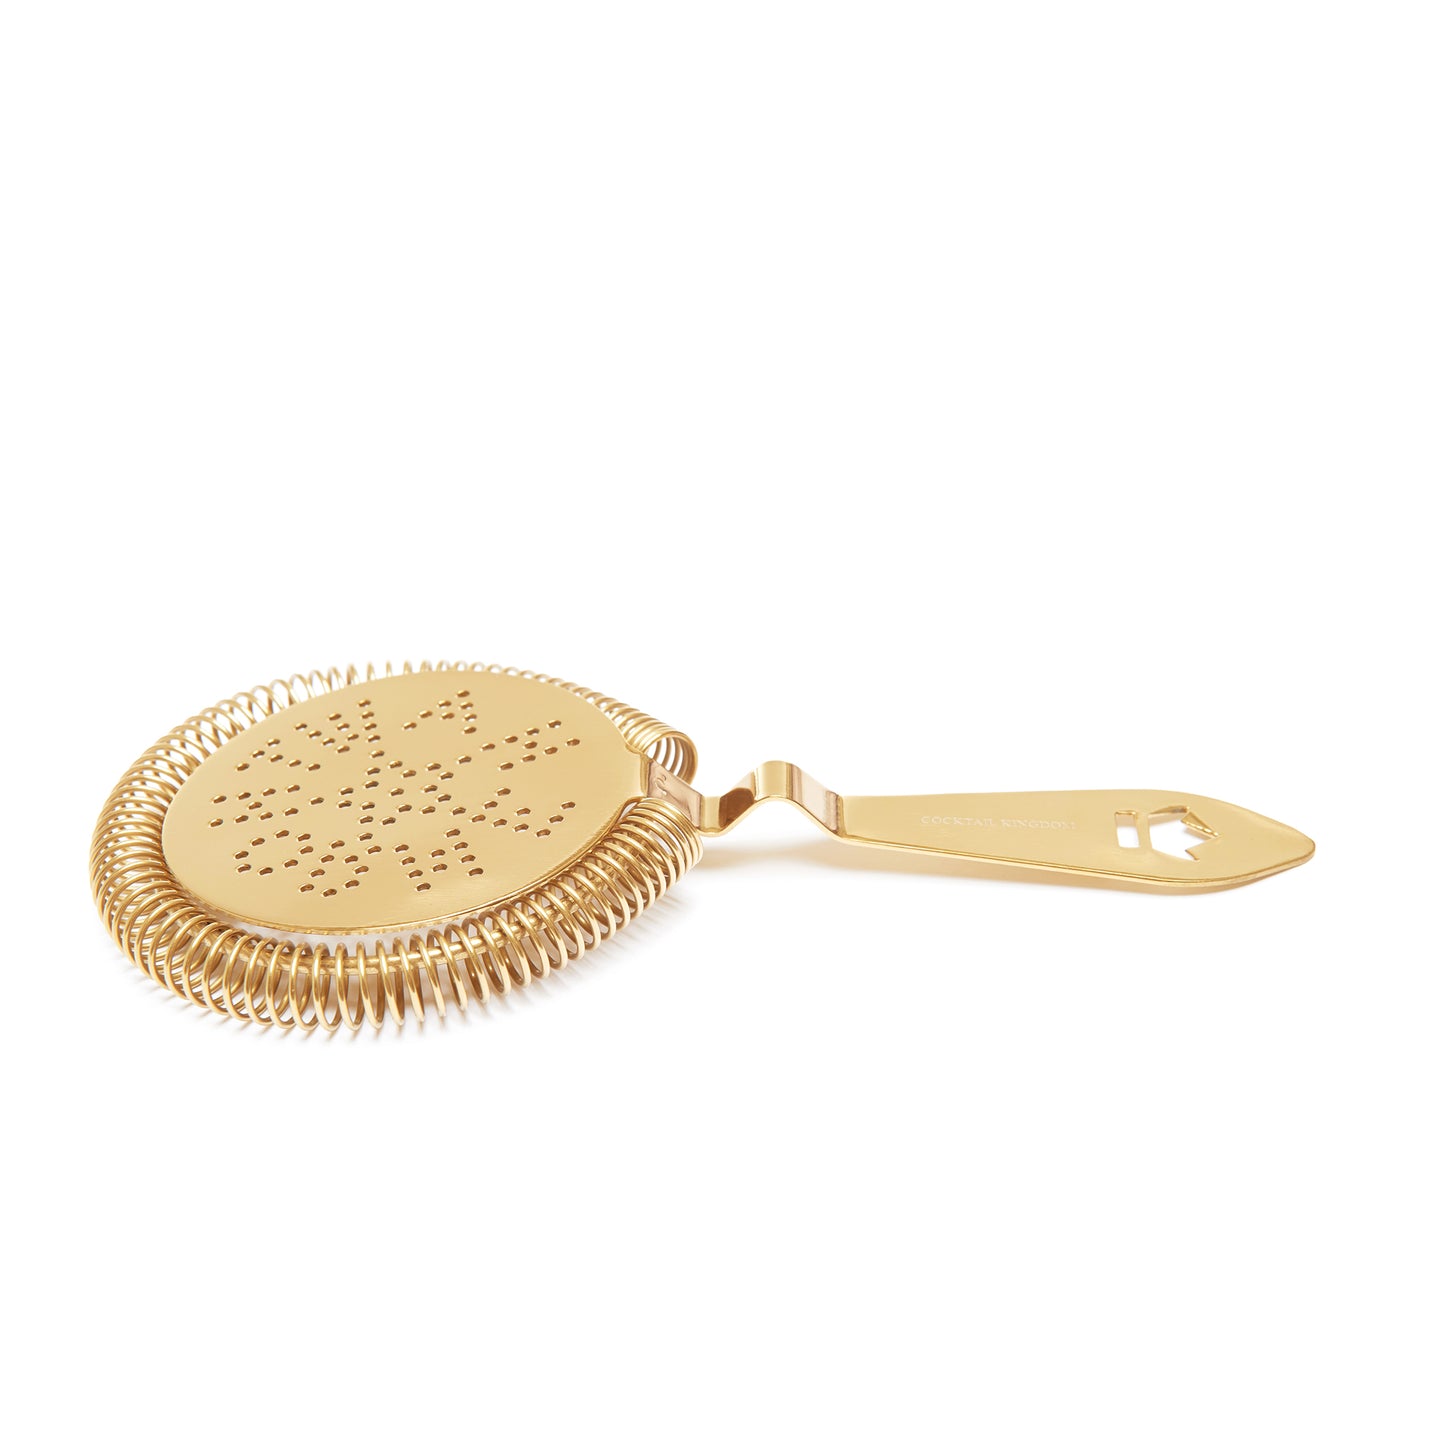 LARGE ANTIQUE-STYLE COCKTAIL STRAINER / GOLD-PLATED